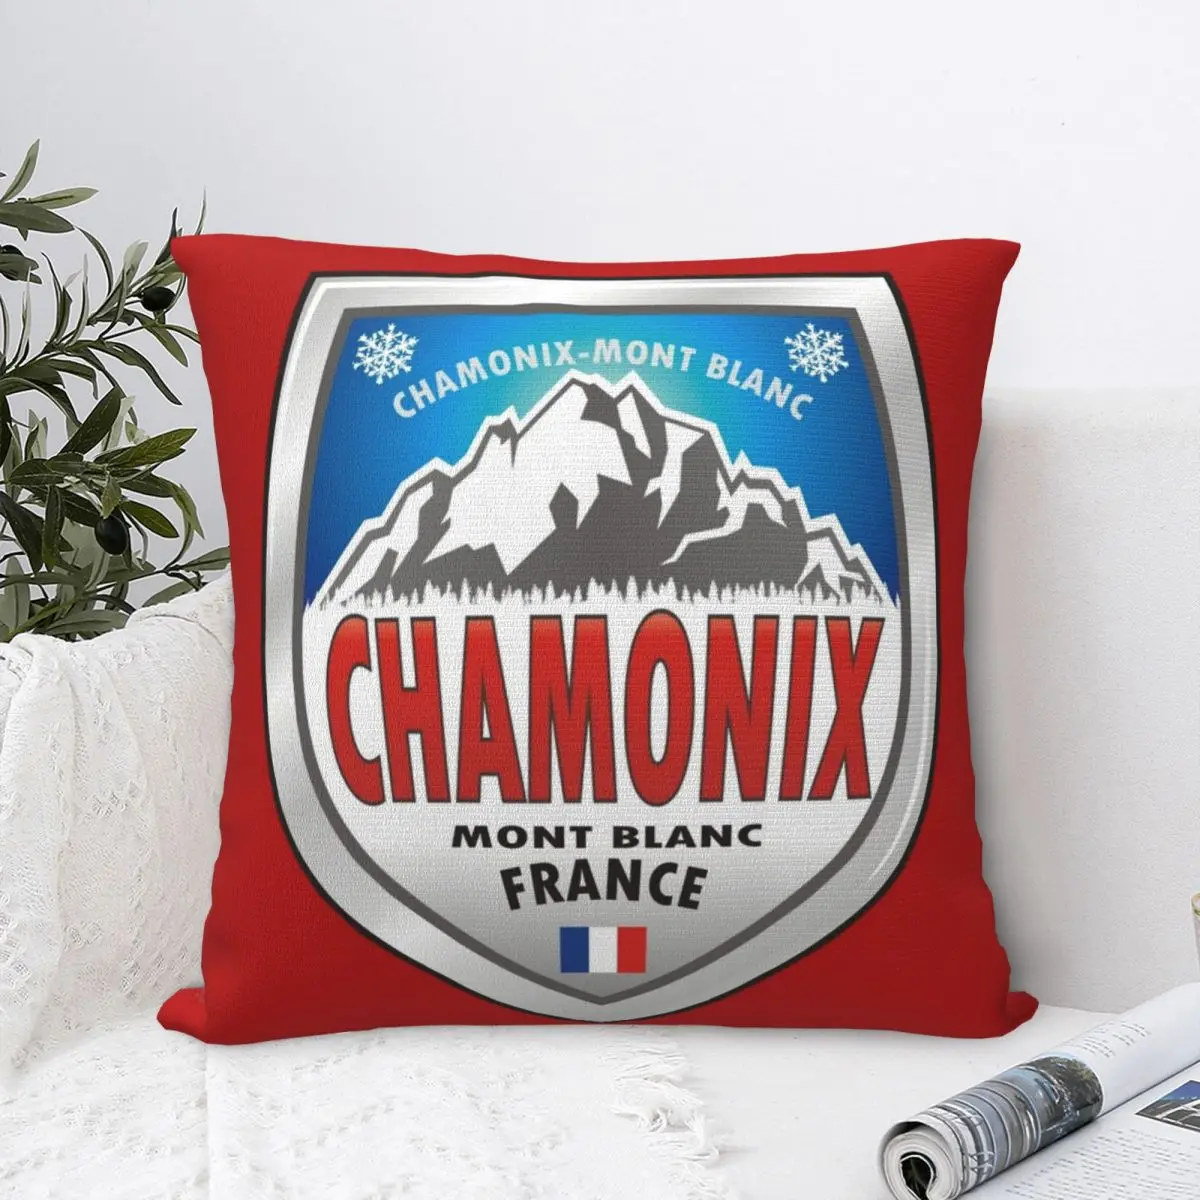 

Chamonix Mont Blanc France Emblem Square Pillowcase Cushion Cover Decorative Pillow Case Polyester Throw Pillow cover For Home